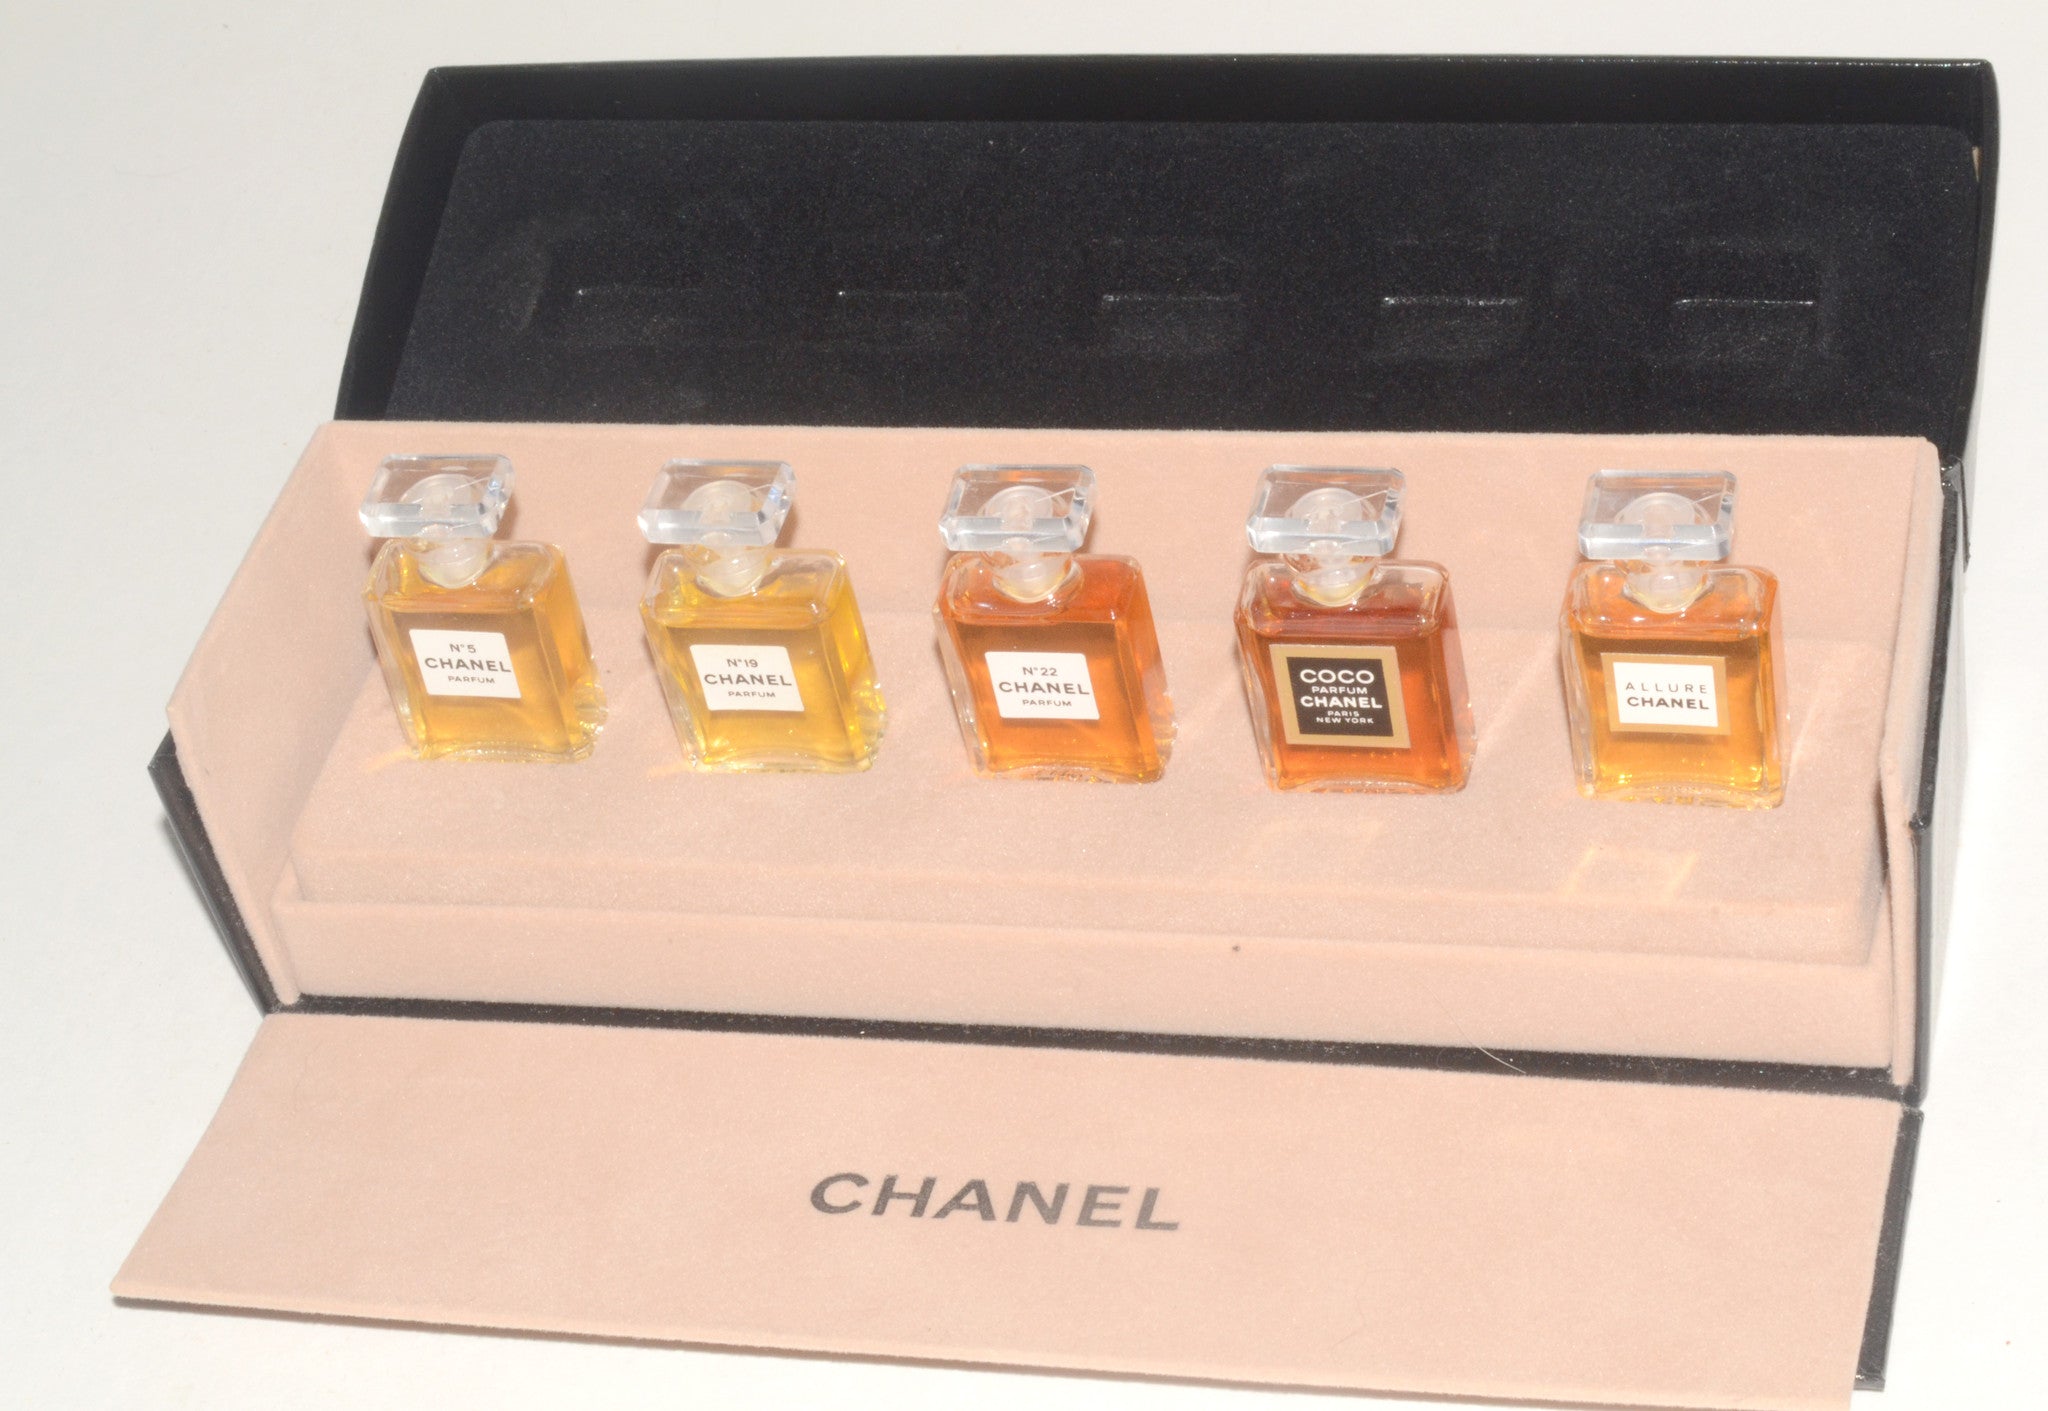 Chanel Perfume Miniature Boxed Set – Quirky Finds